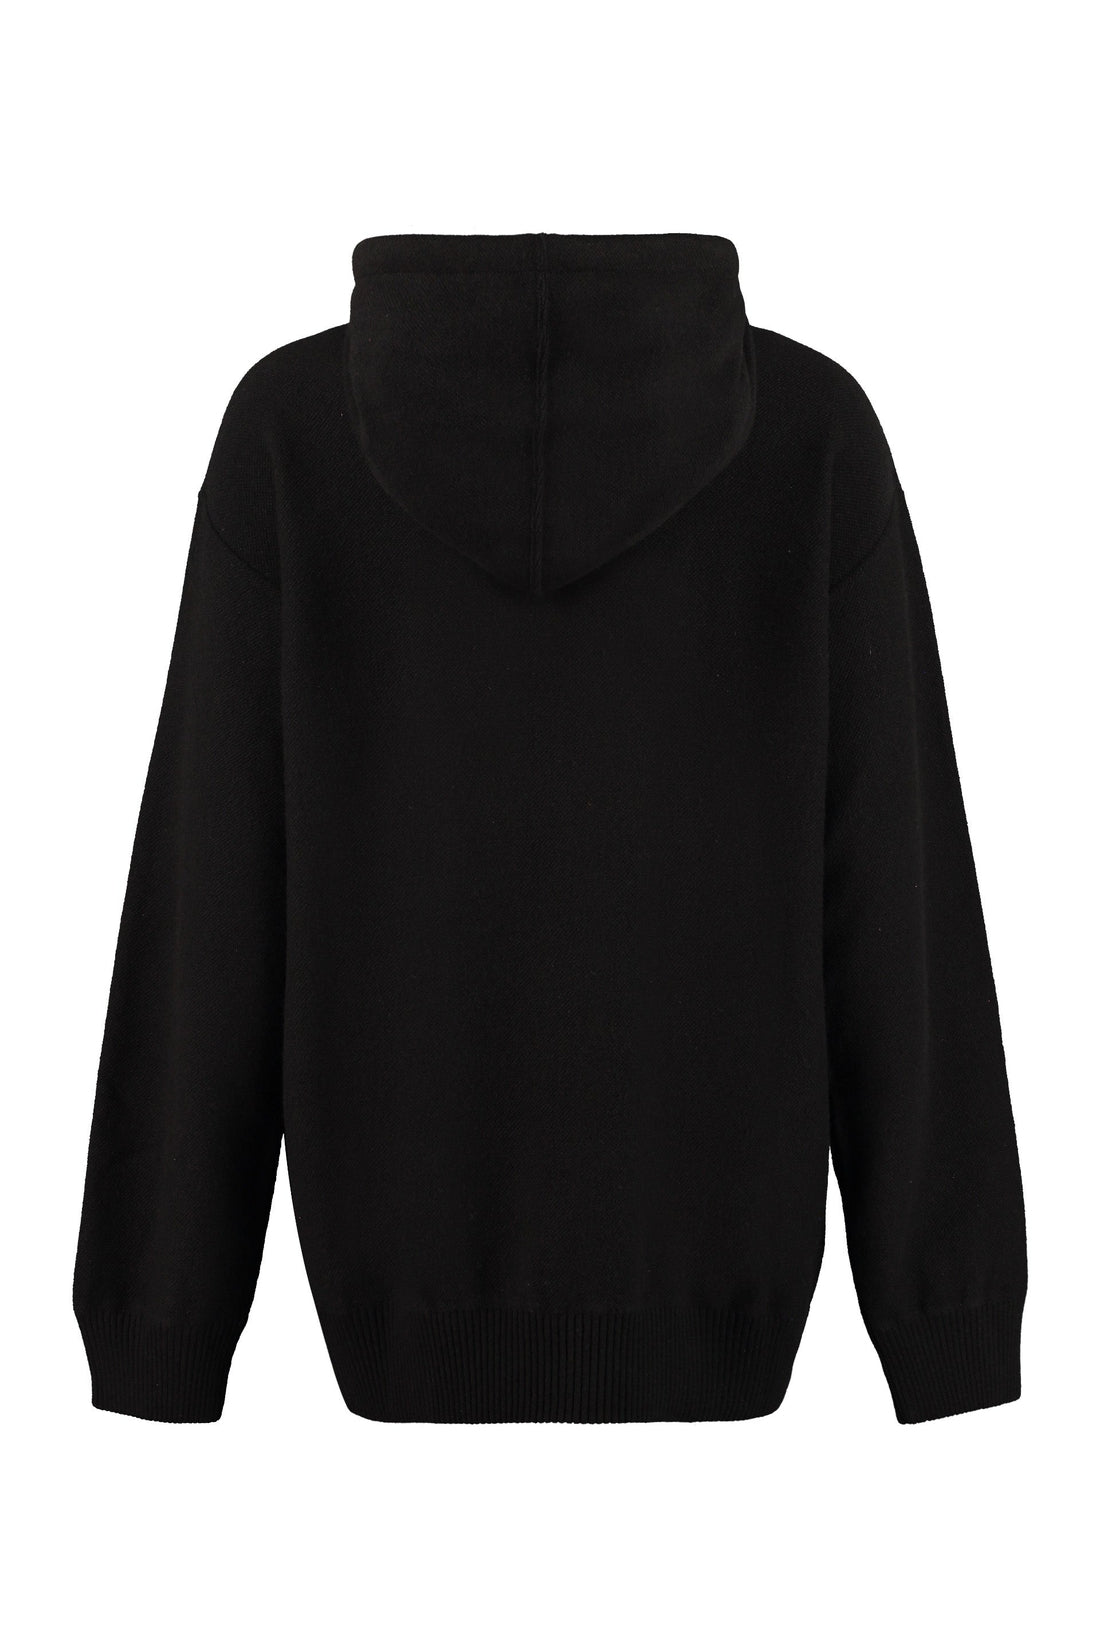 Versace-OUTLET-SALE-Knitted hoodie-ARCHIVIST